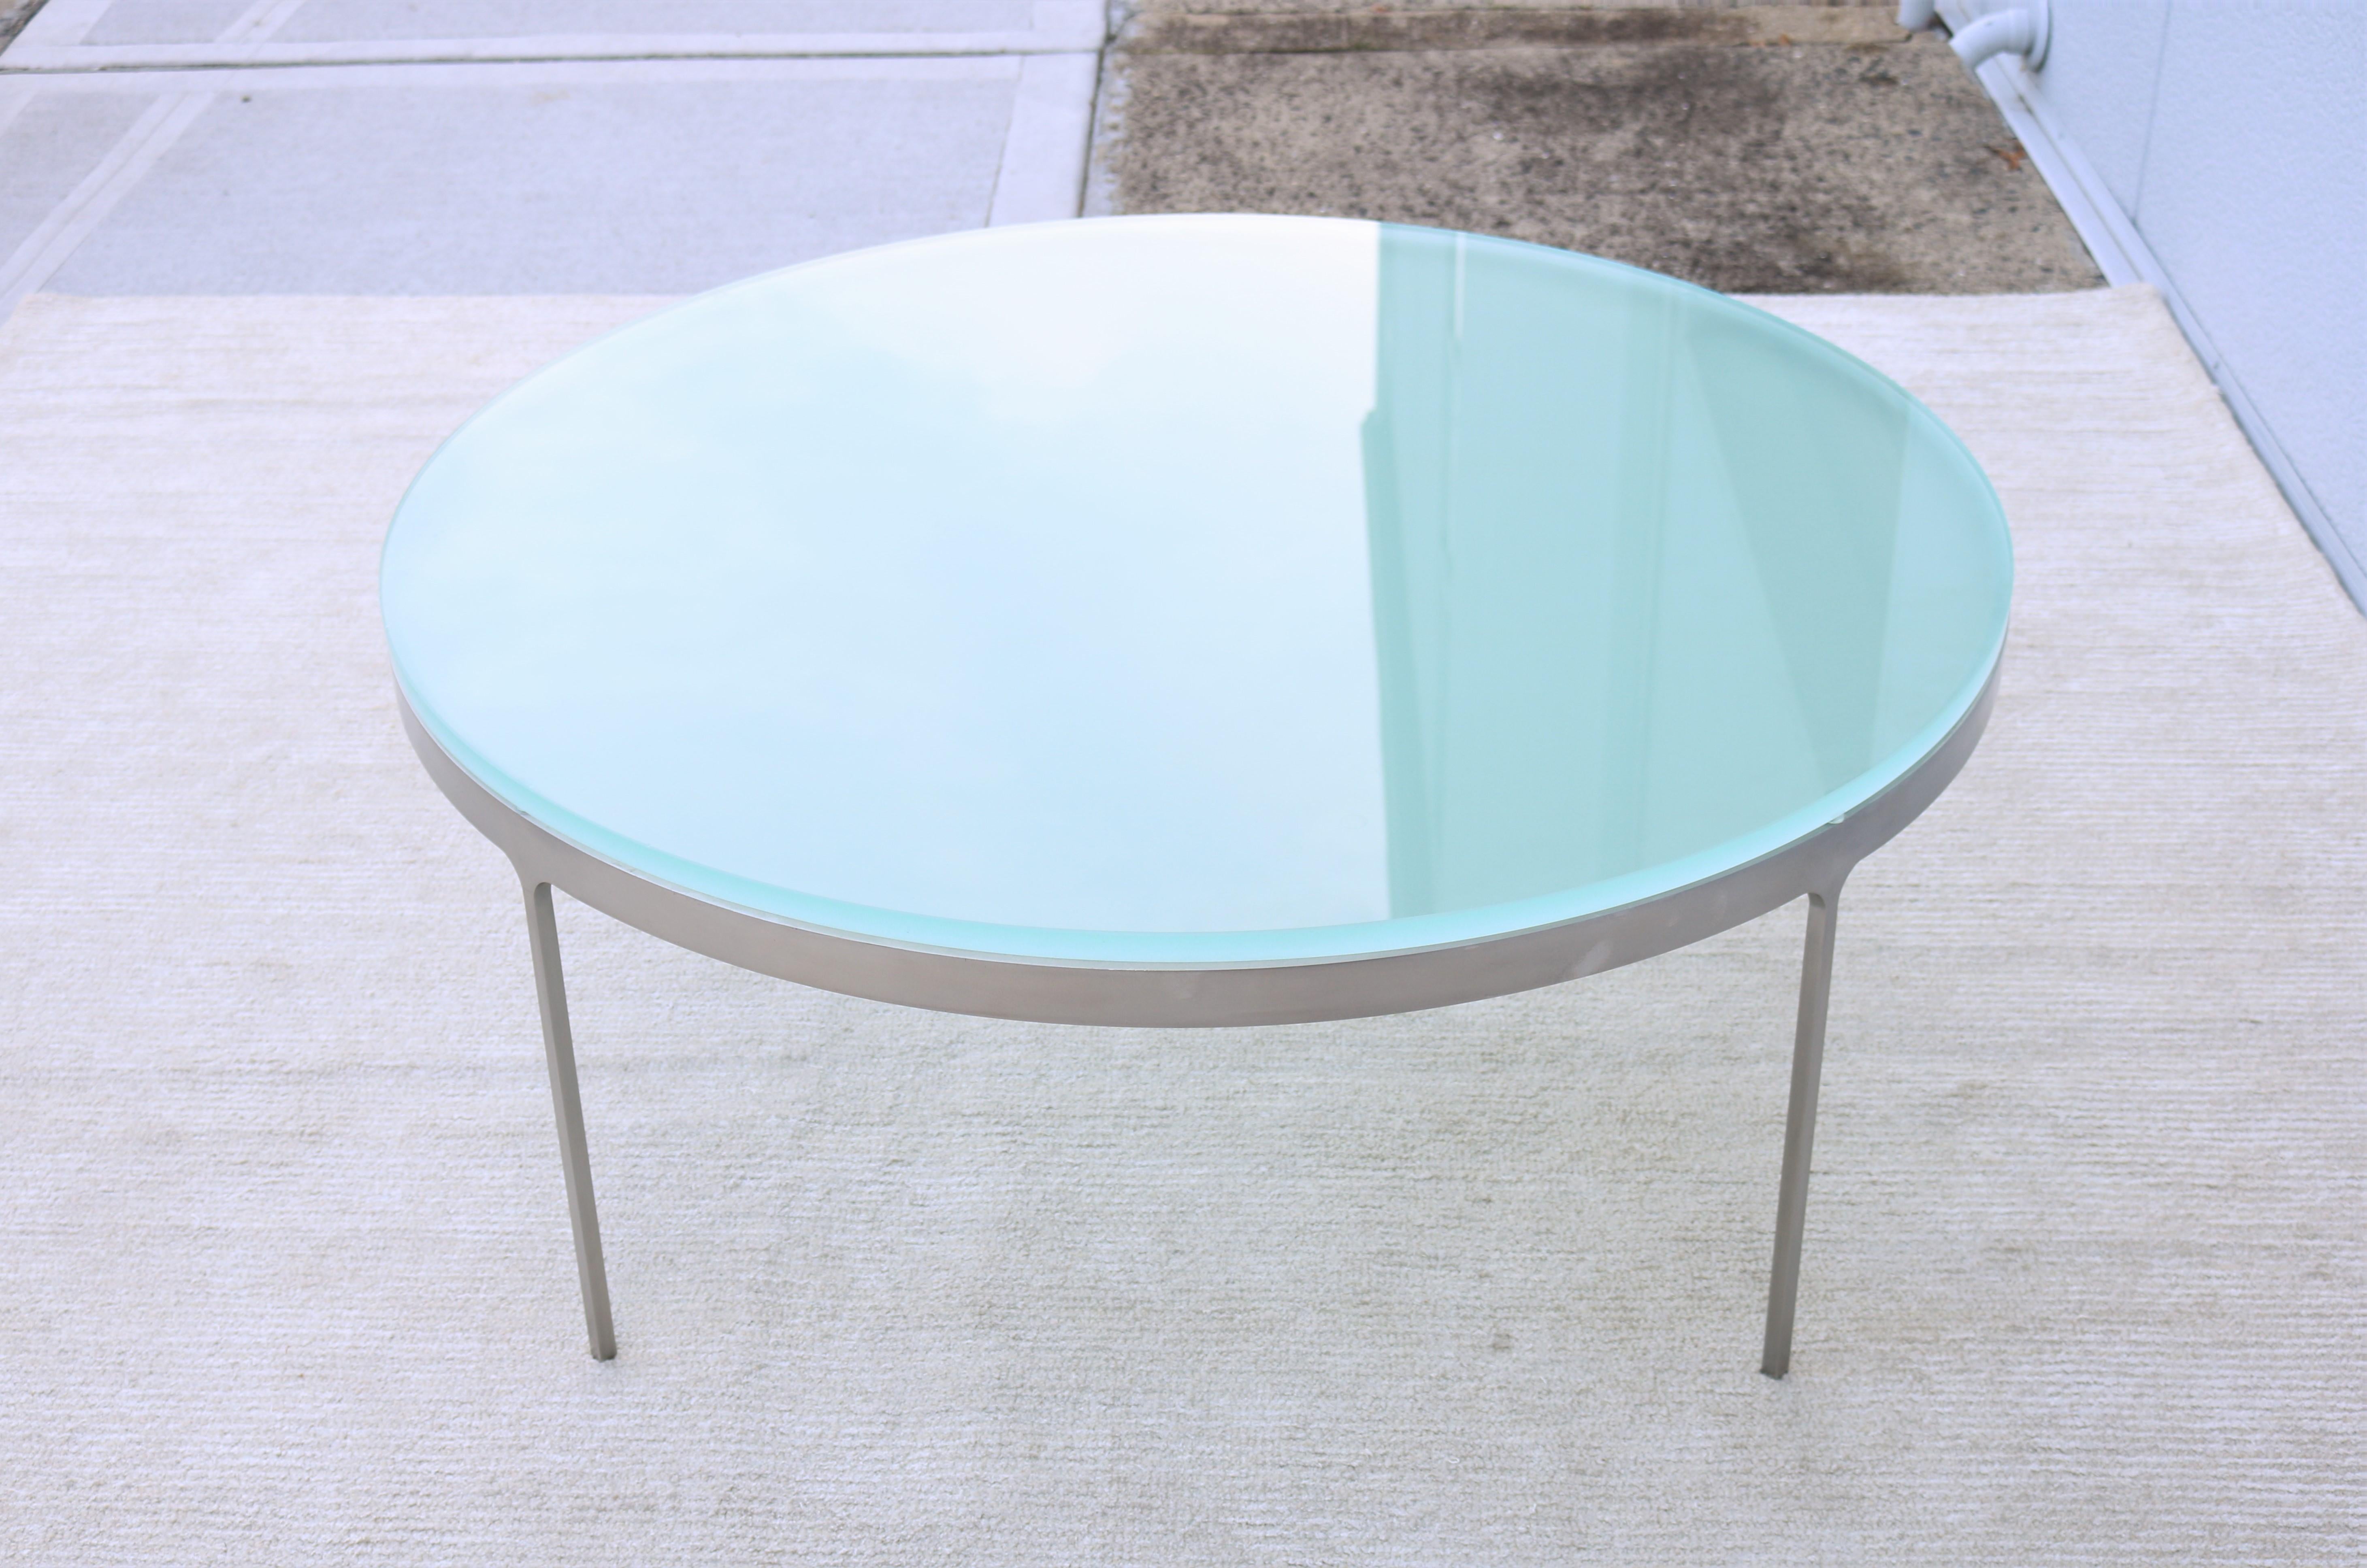 Vintage Minimalist Nicos Zographos Round Glass and Stainless-Steel Coffee Table For Sale 2